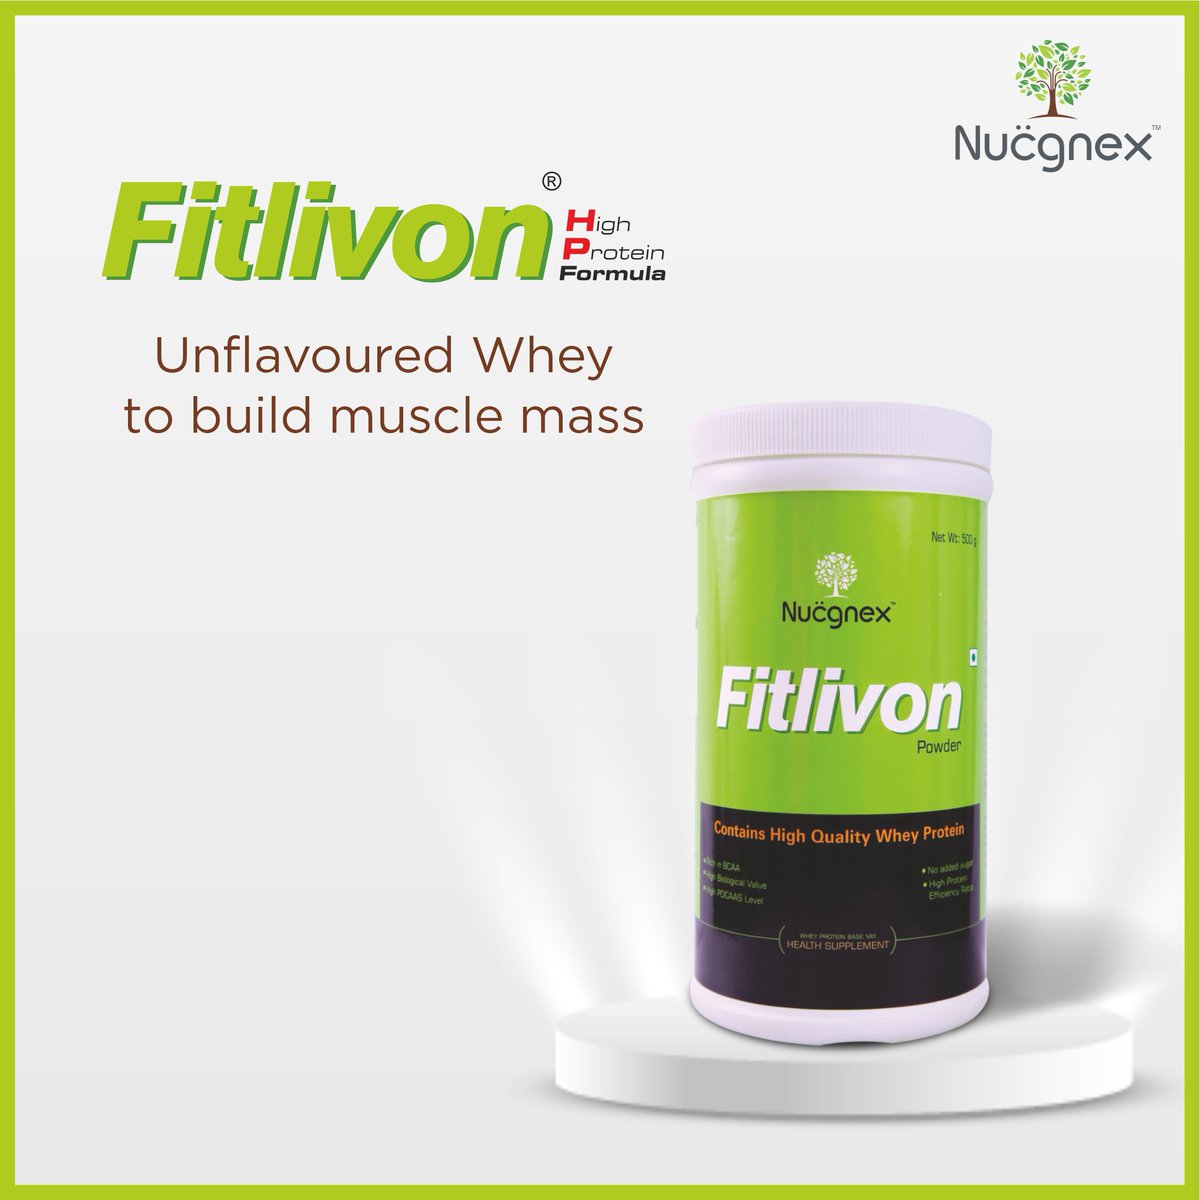 Fitlivon - a unique health formula based on the science of cell nutrition to bridge the protein gap.

It is a sugar-free, colour-free, flavour-free, gluten-free protein supplement aiming for improved health and fitness.

#Nucgnex #NucgnexLifescience #CellularNutrition #Fitlivon